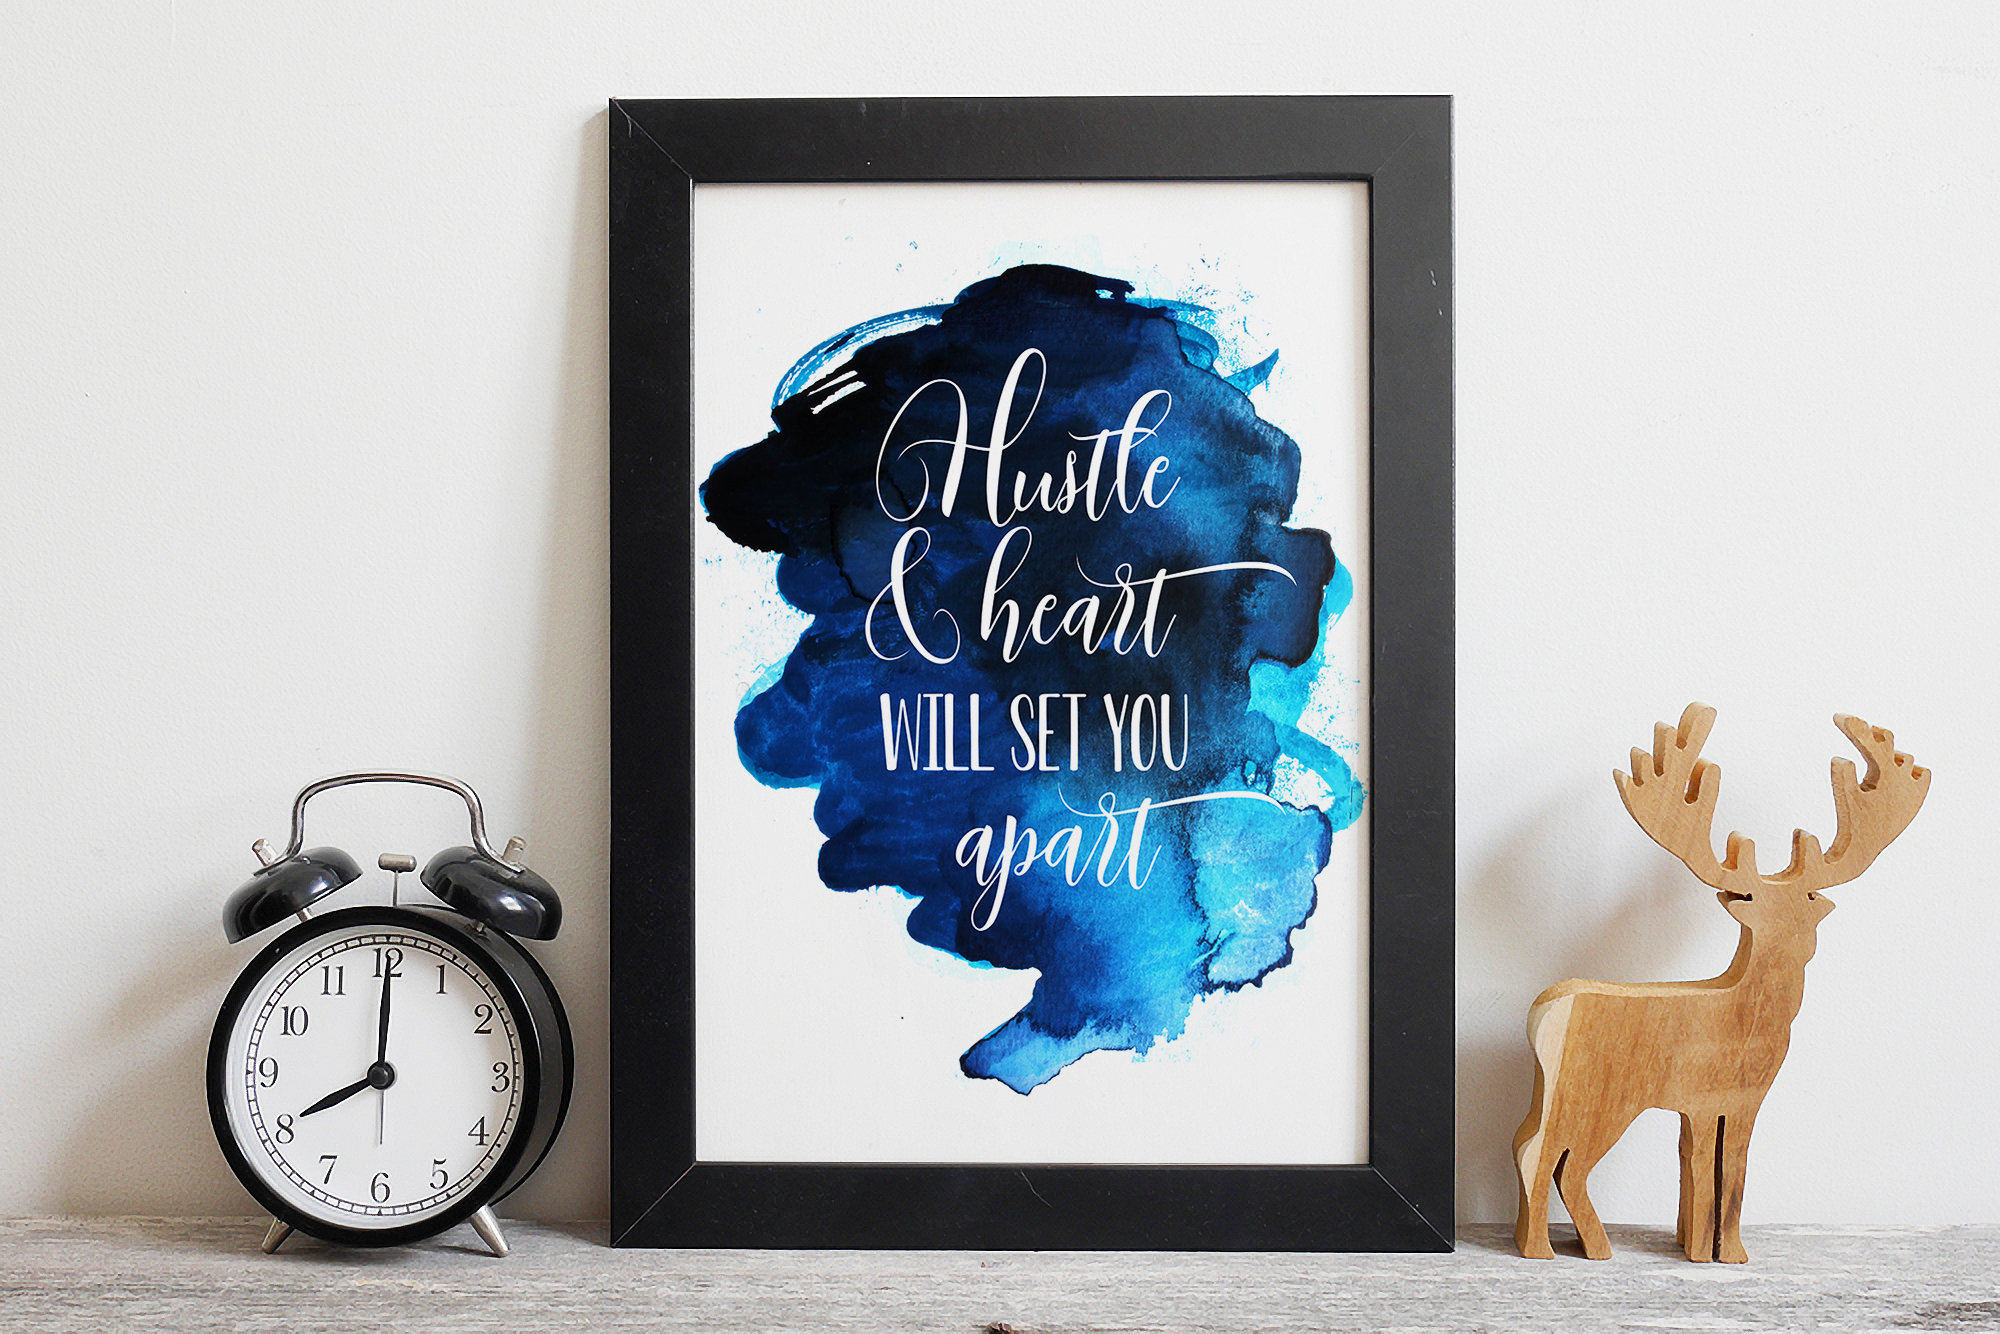 Hustle and Heart Will Set You Apart, Inspirational Quotes, Motivation Wall Art